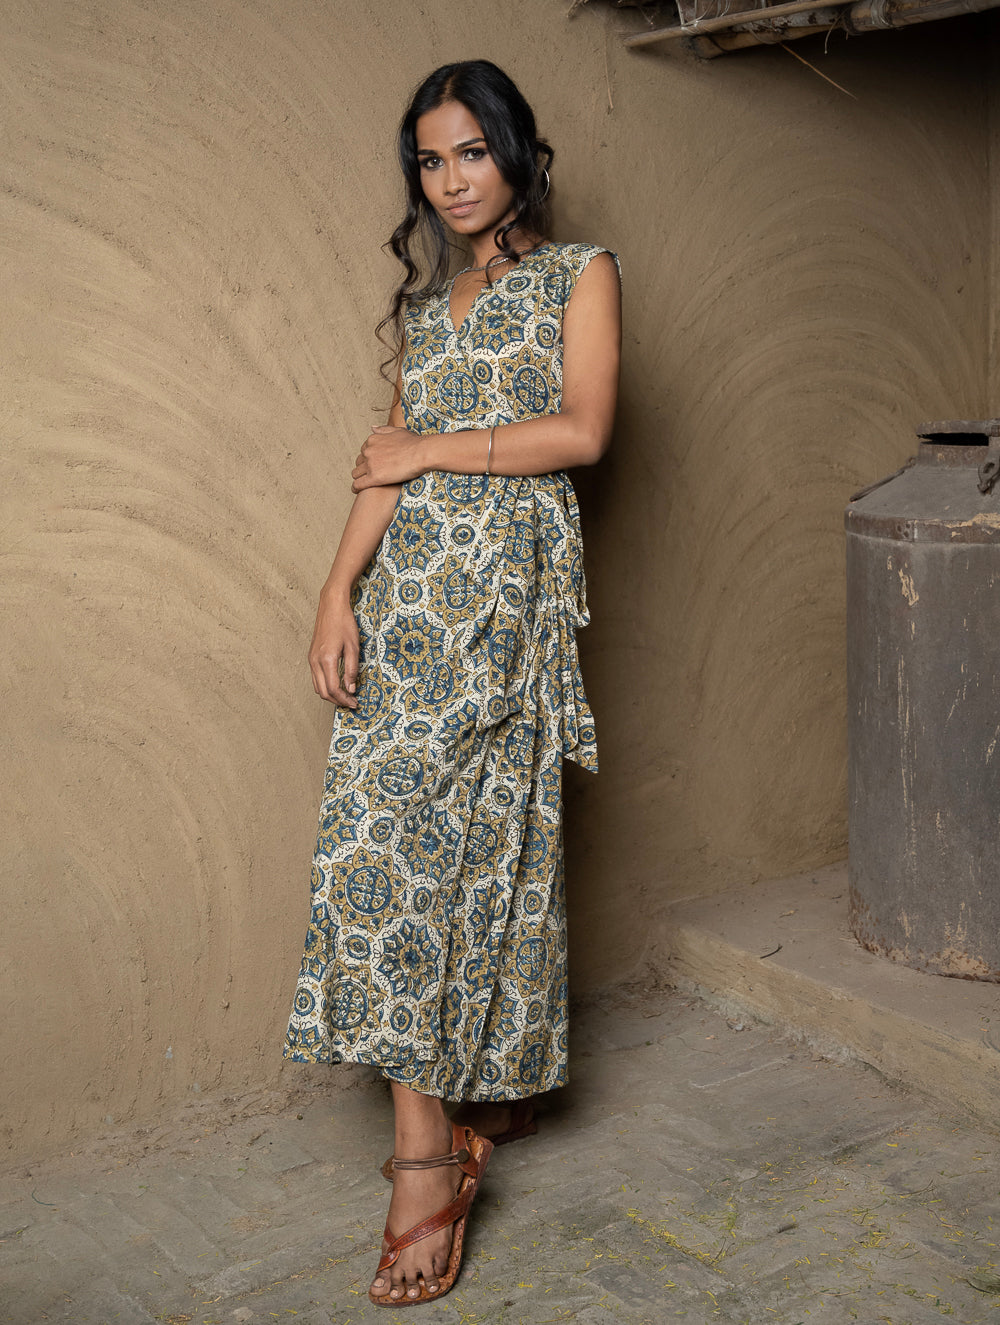 Load image into Gallery viewer, Ajrakh Hand Block Printed Long Wrap Dress - Ornate Flora